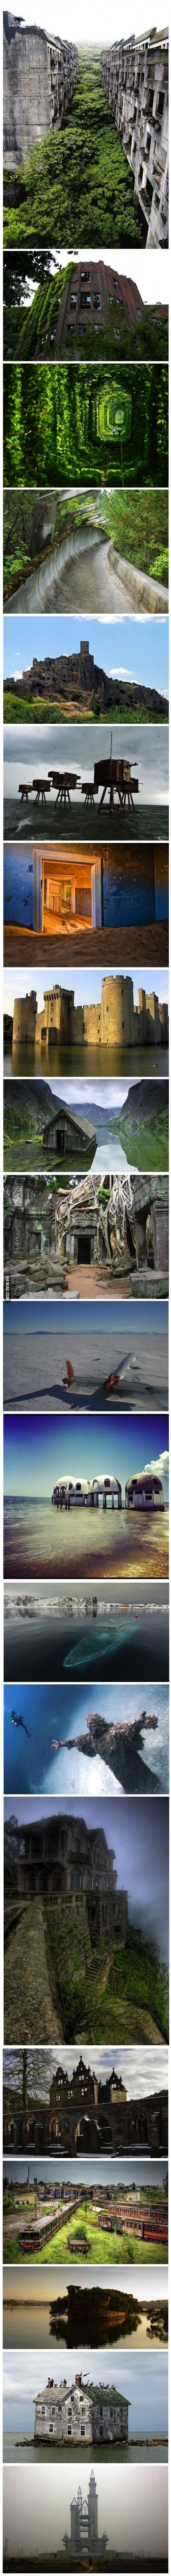 20 Most Amazing Abandoned Places On The Planet